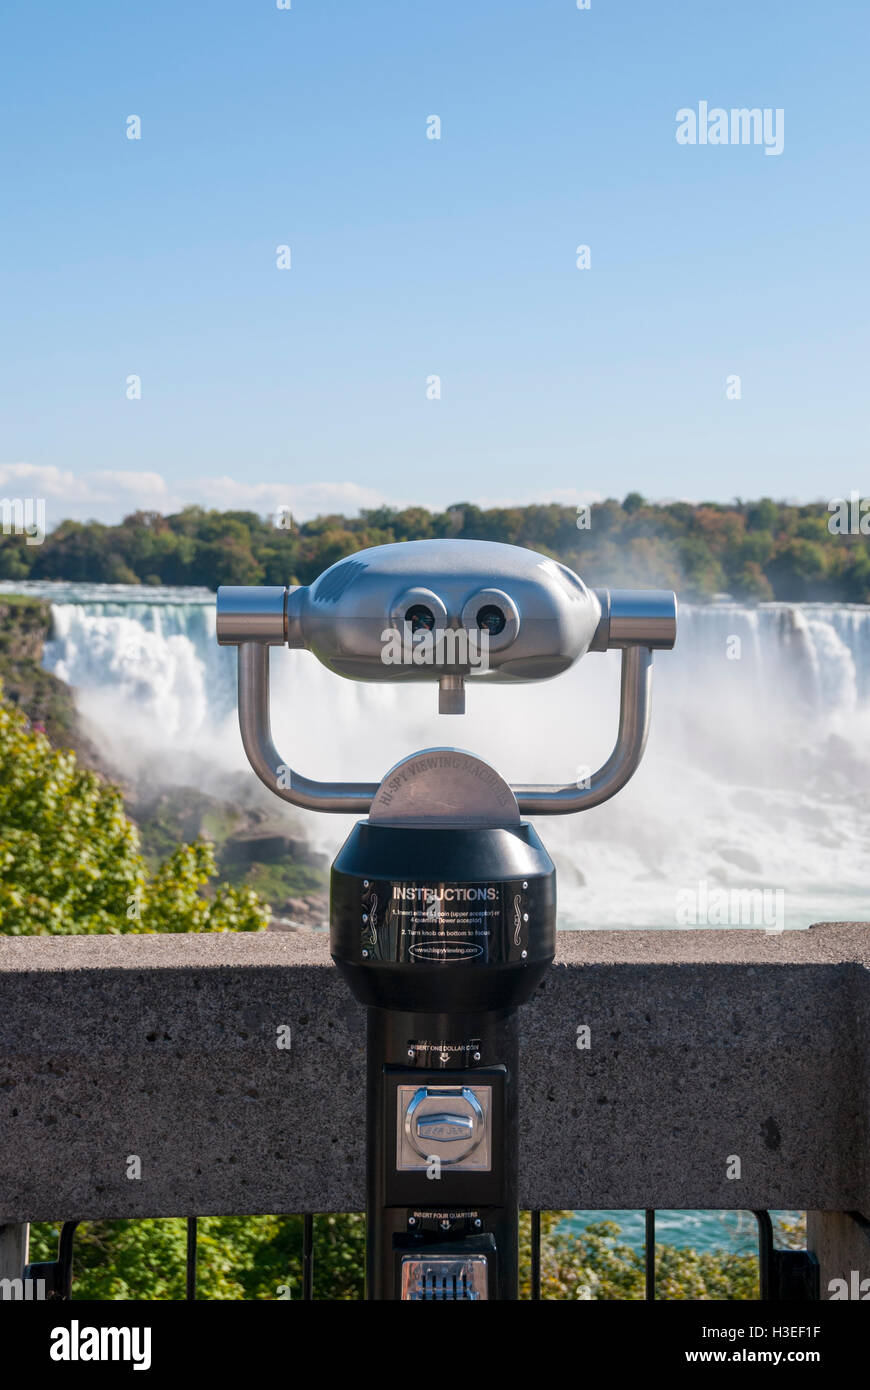 Coin-operated binoculars for viewing the American Falls and other objects from the Canadian side of Niagara Falls Stock Photo